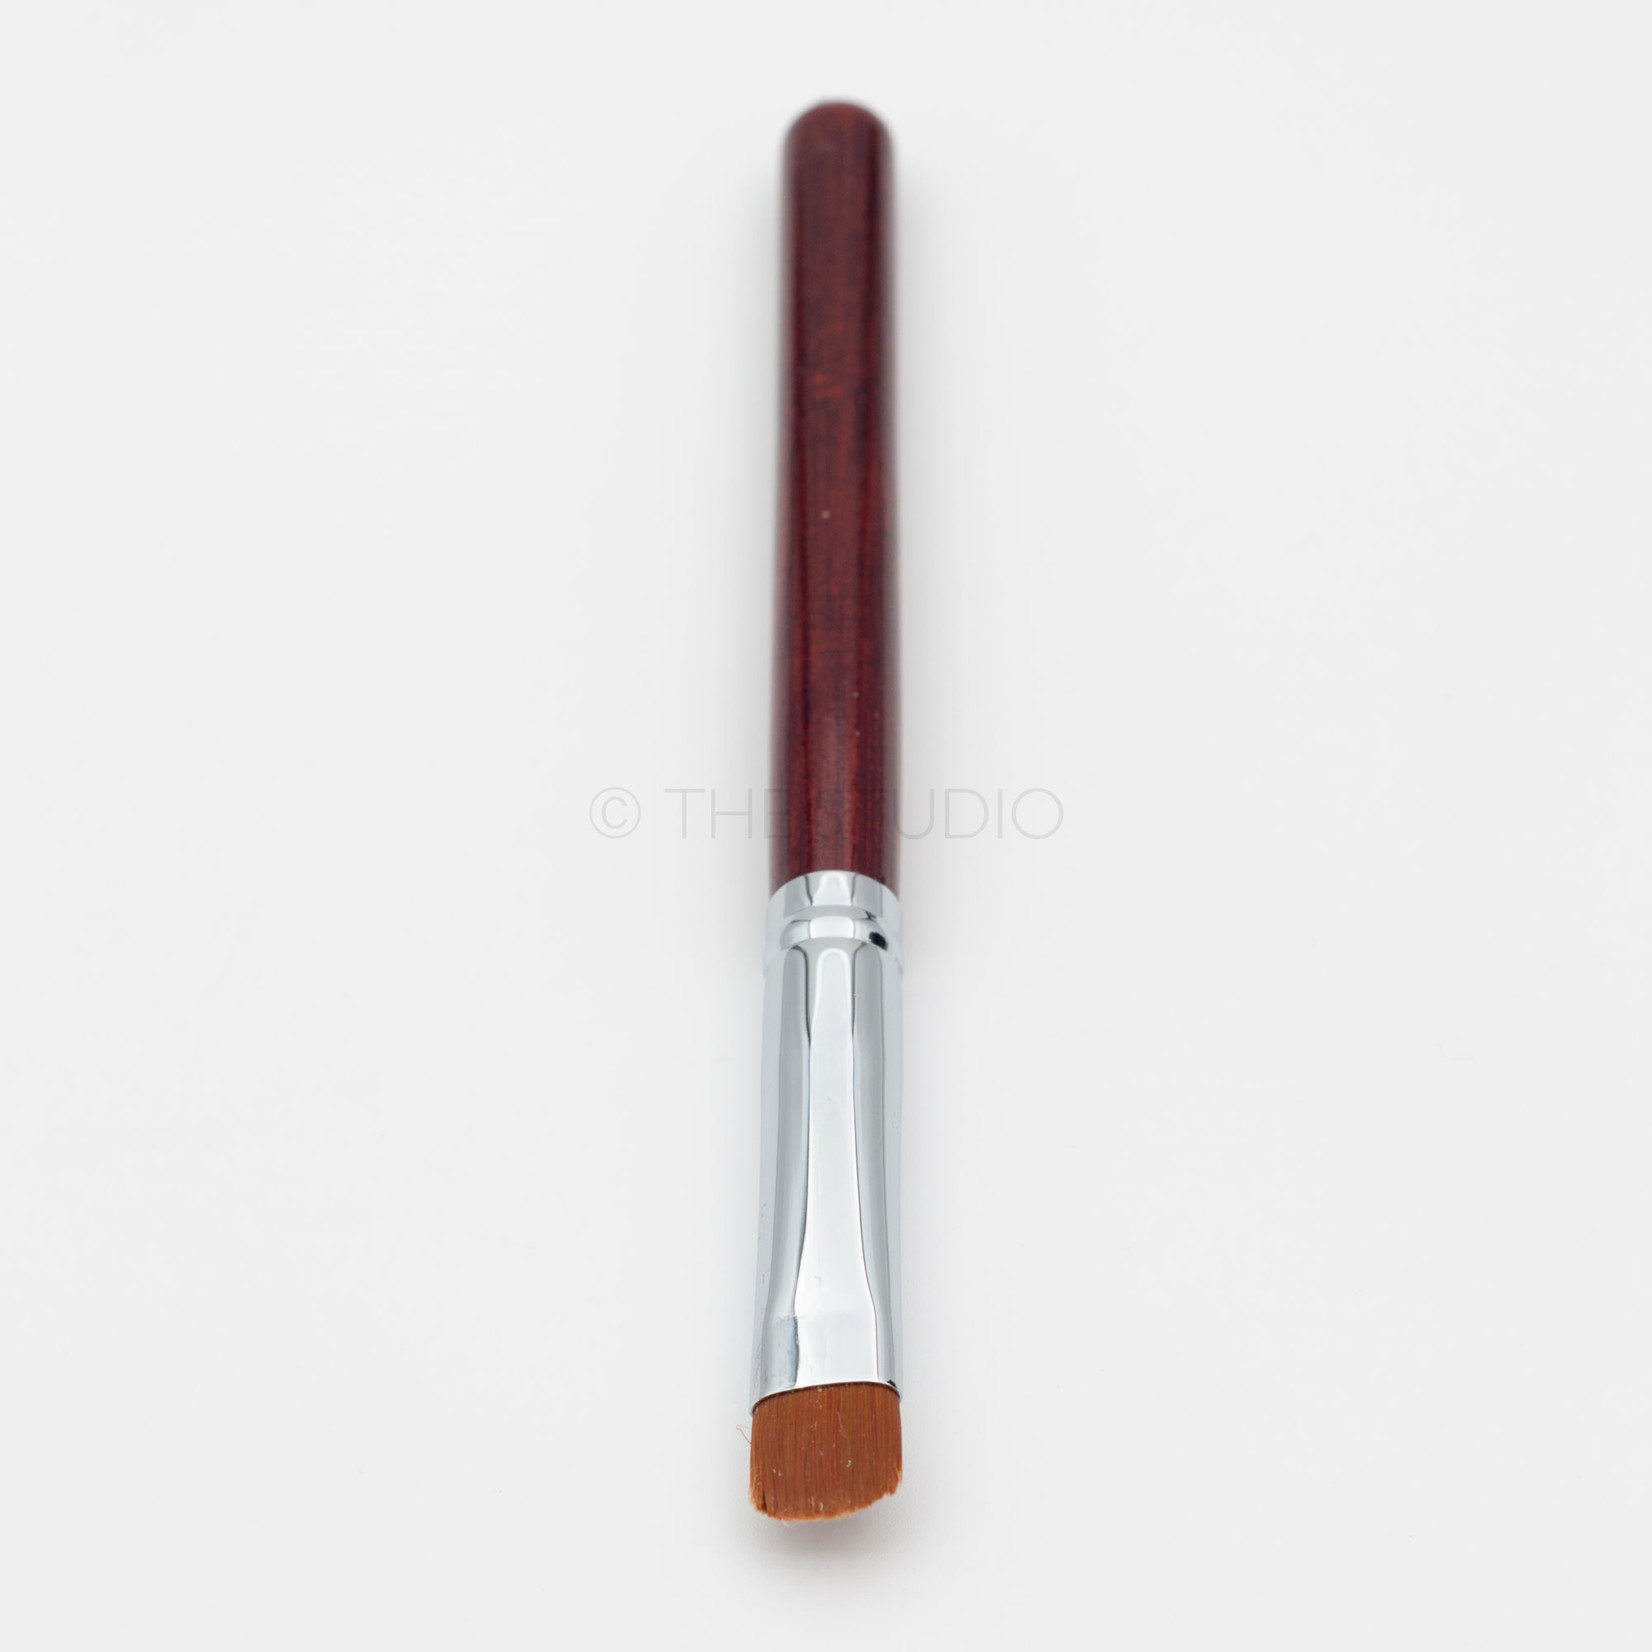 Cre8tion Cre8tion - French Brush - Wood - #16 - 12145